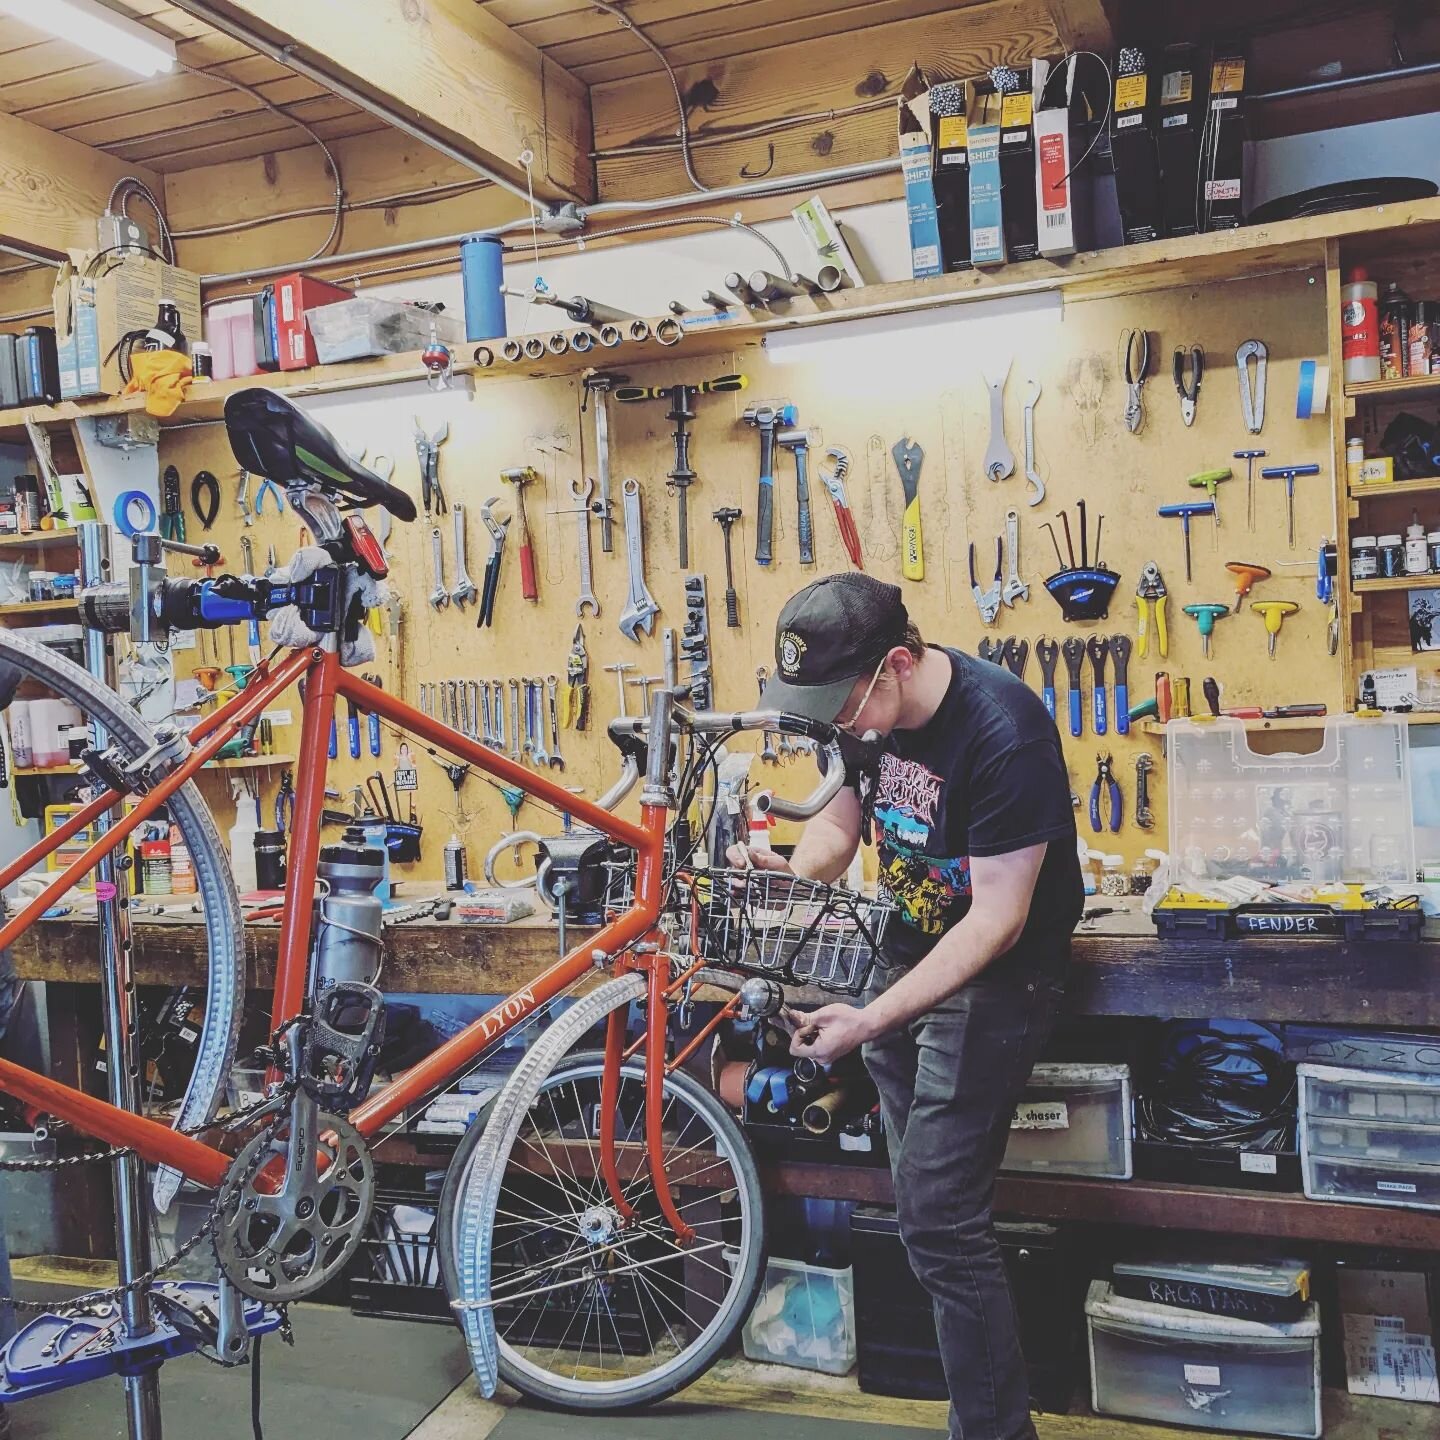 If you're like me, you mayyyyy have gone a little too long without fenders this year. Time to get those puppies on! Now is a great time to get your bike tuned up for the #chillyhilly, install some gorgeous fenders, and beat the spring crowds. 

Swing